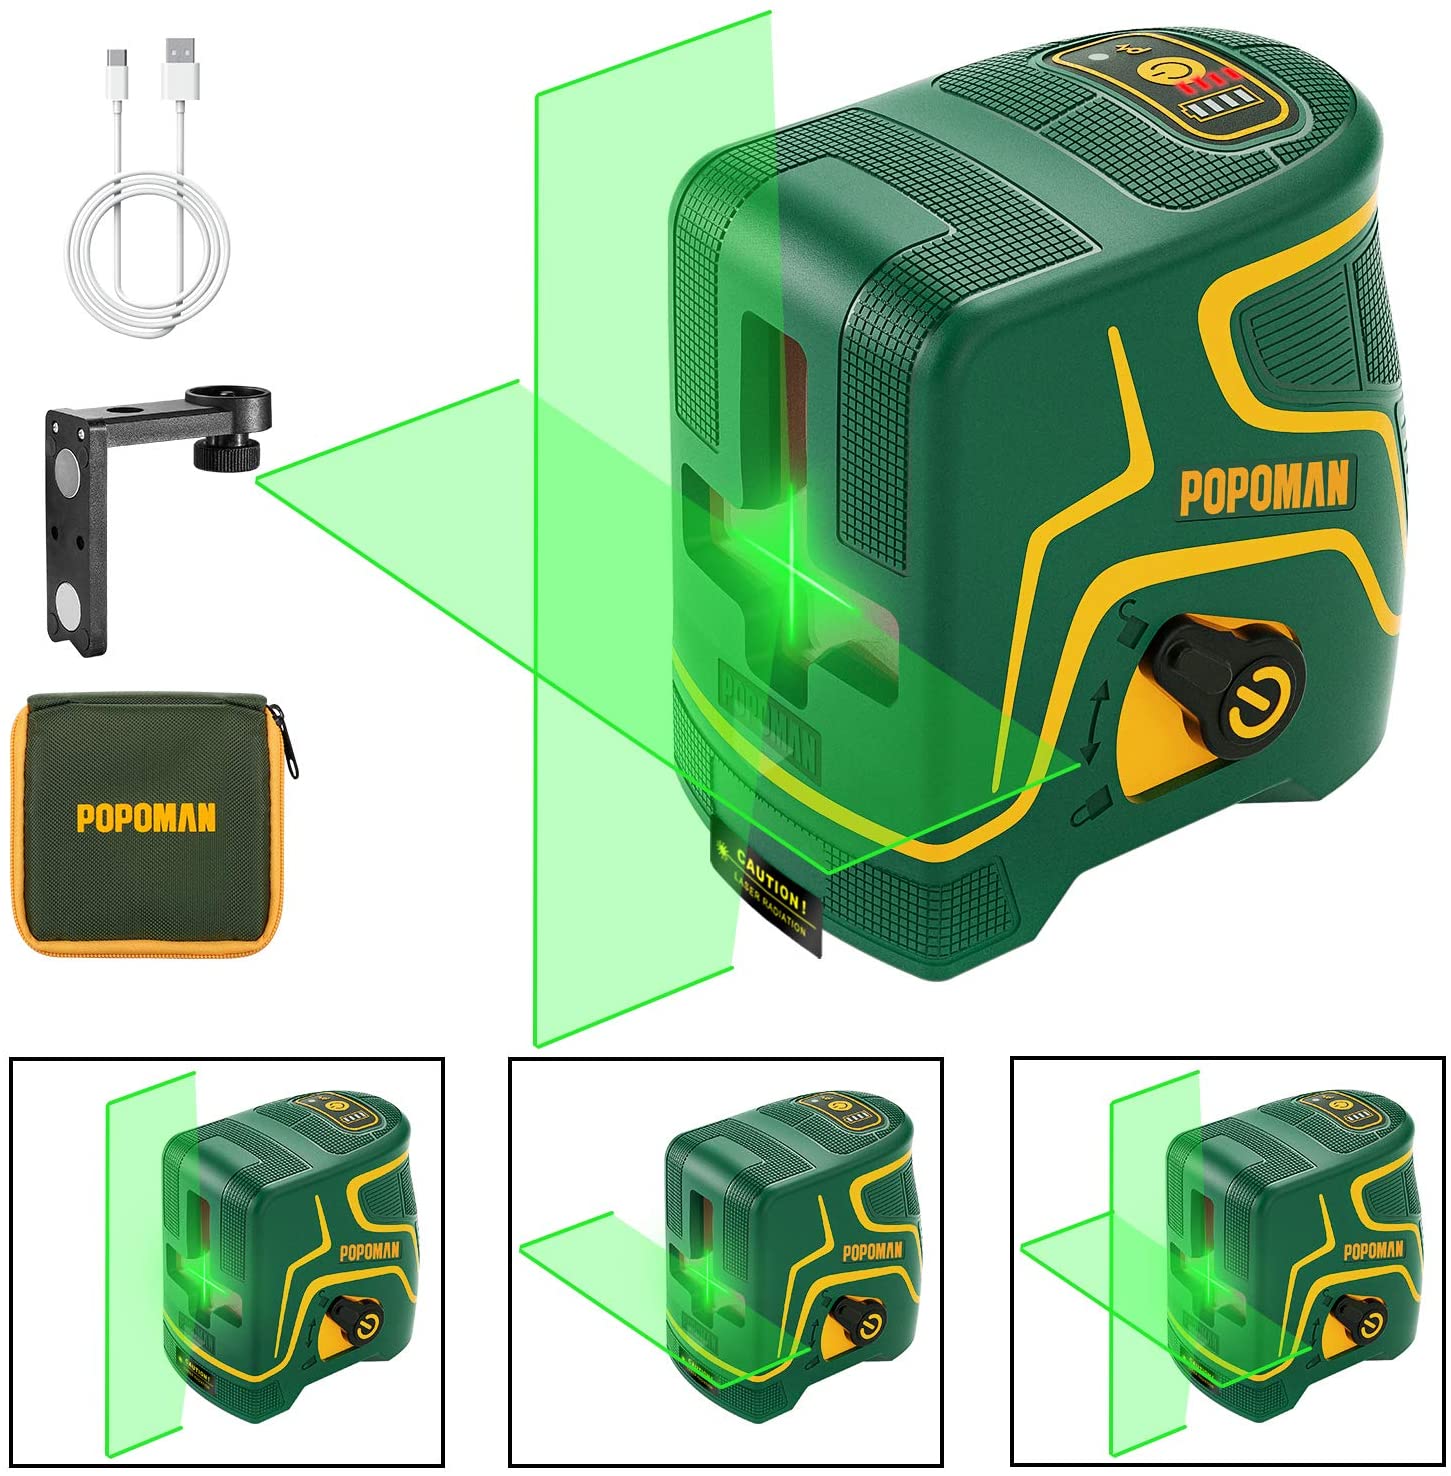 POPOMAN Laser Level Green 2x360°, Line laser rechargeable with Lithium  battery, Self Leveling, Pulsed mode, Magnetic Auxiliary Supporting Bracket,  IP54, Carry bag Include - MTM340B (Color: MTM340B)